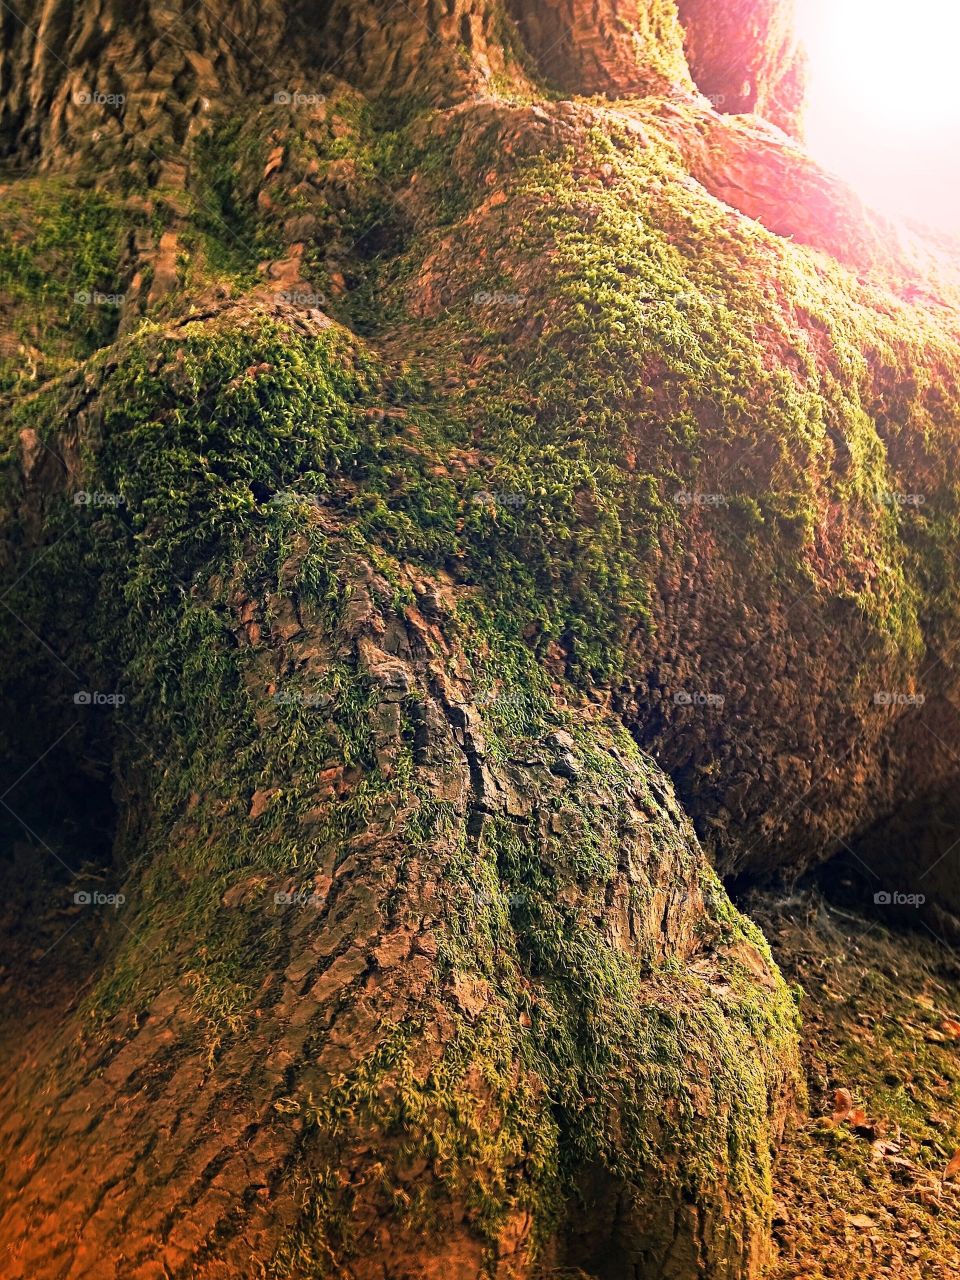 Knaughty — Exposed tree roots with moss and lichen at golden hour. 